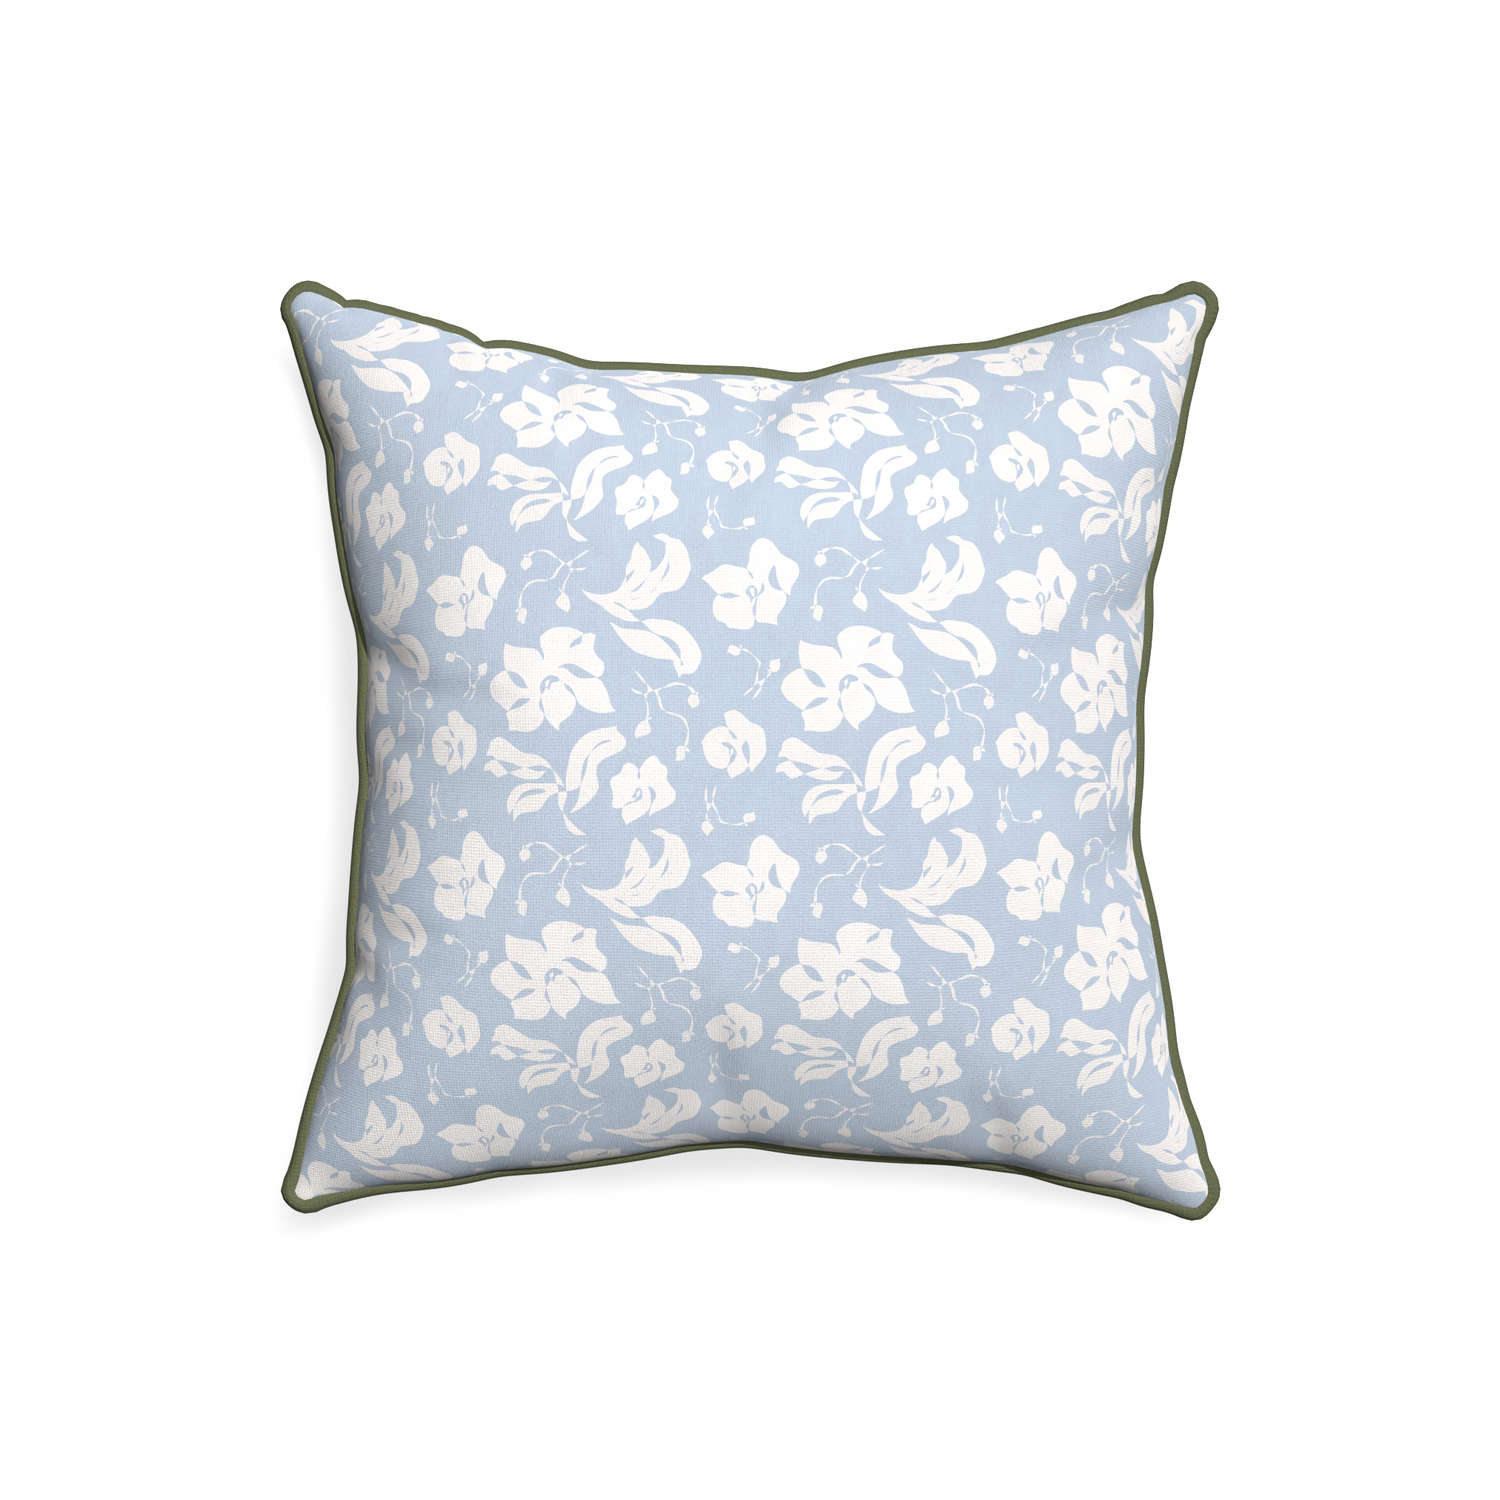 20-square georgia custom cornflower blue floralpillow with f piping on white background